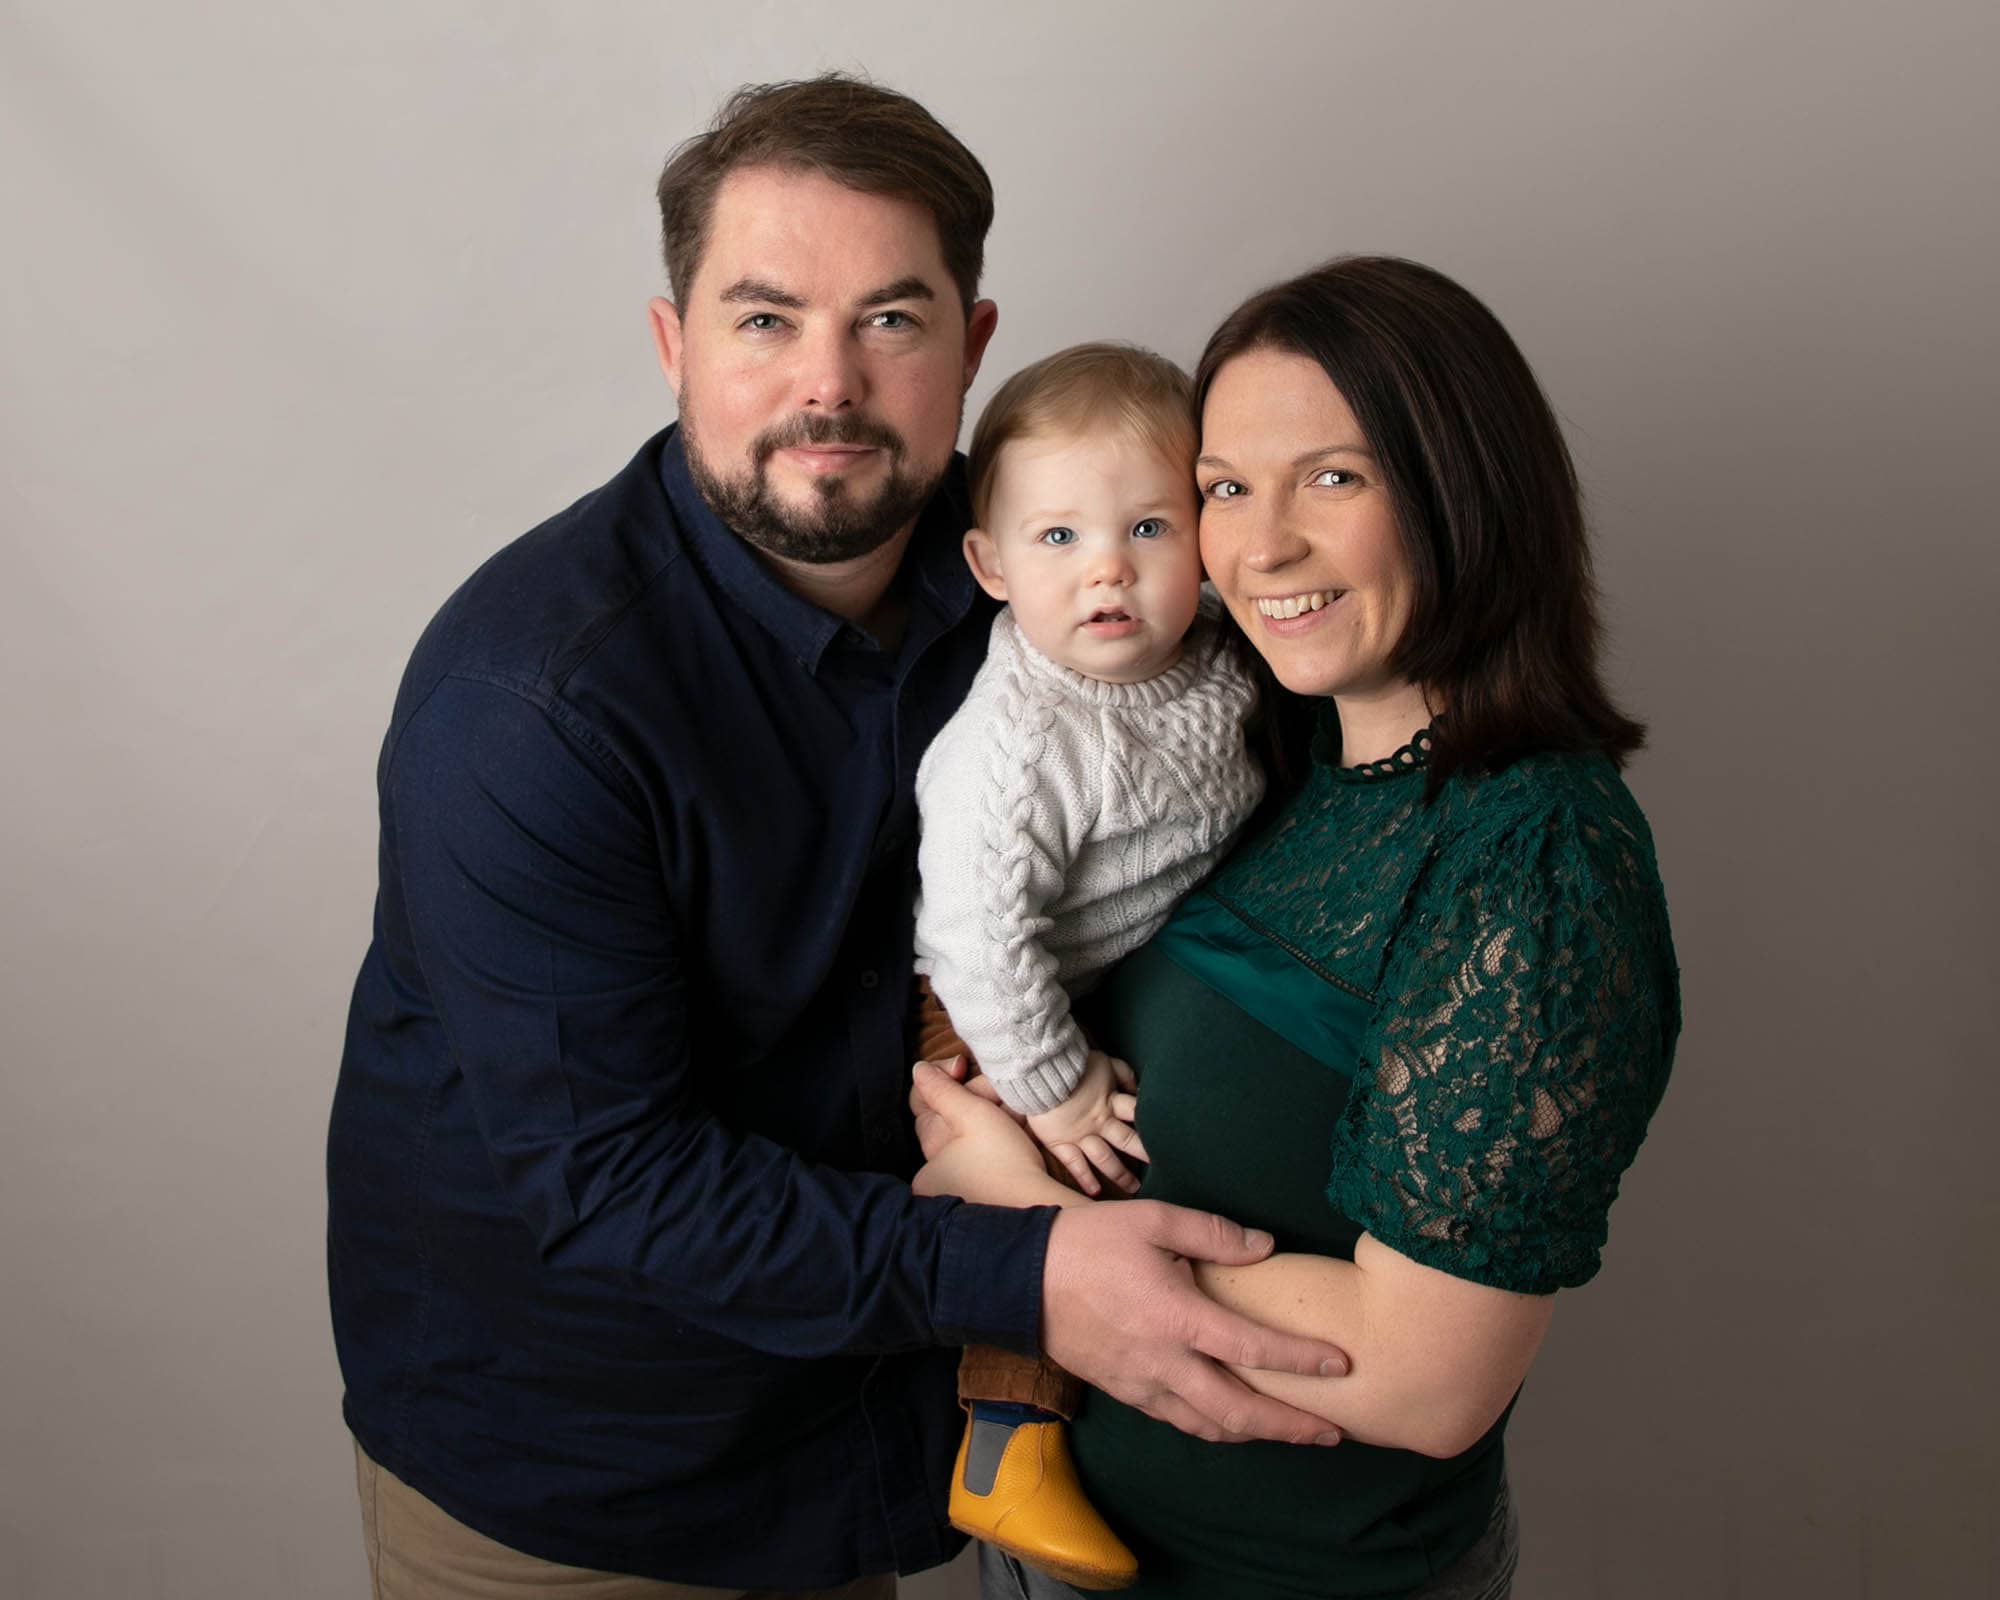 Family portrait of mum, dad and little baby boy. Image taken at Glasgow studio during baby photography session